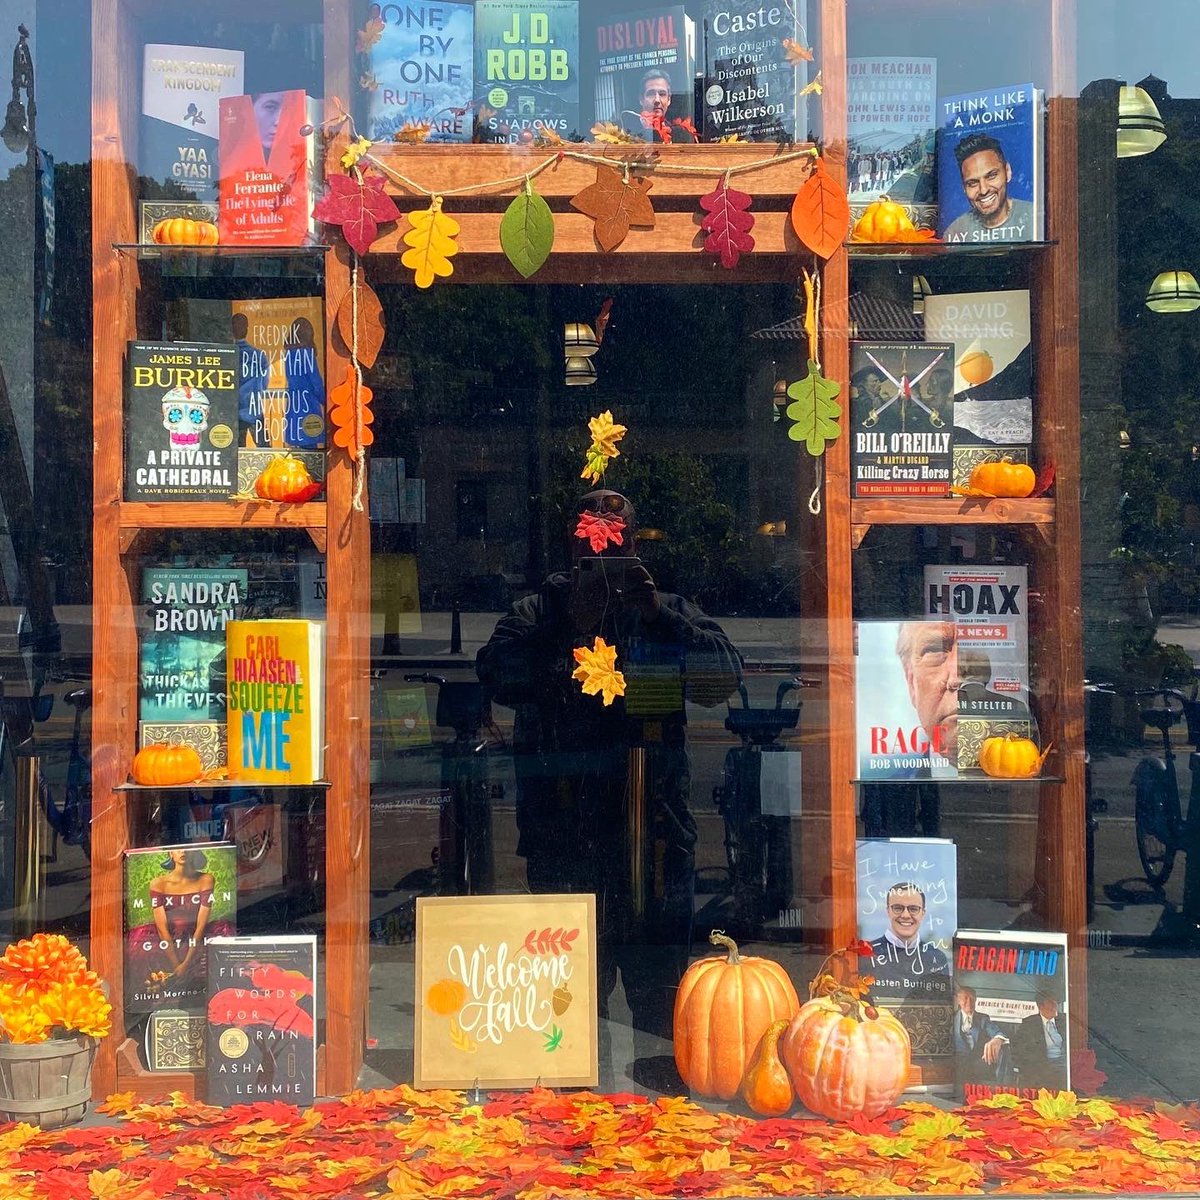 4 weeks since HOAX came out — and today I discovered it in the front window at Barnes & Noble Union Square — best surprise of the month. Right behind RAGE, appropriately!